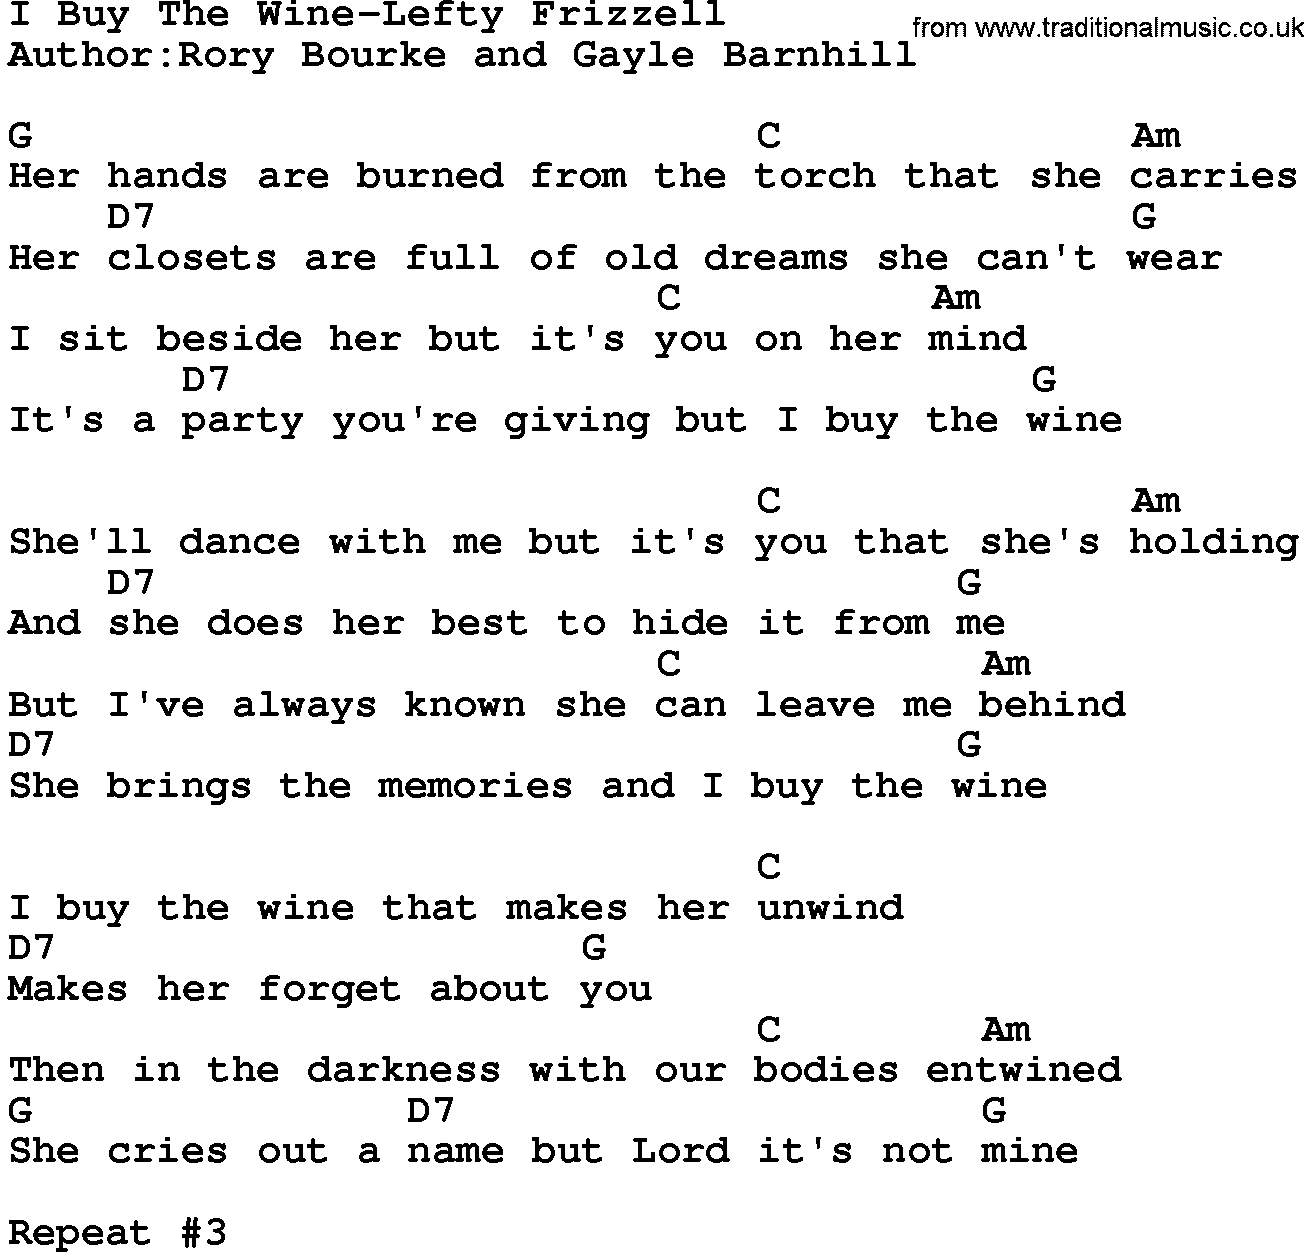 Country music song: I Buy The Wine-Lefty Frizzell lyrics and chords